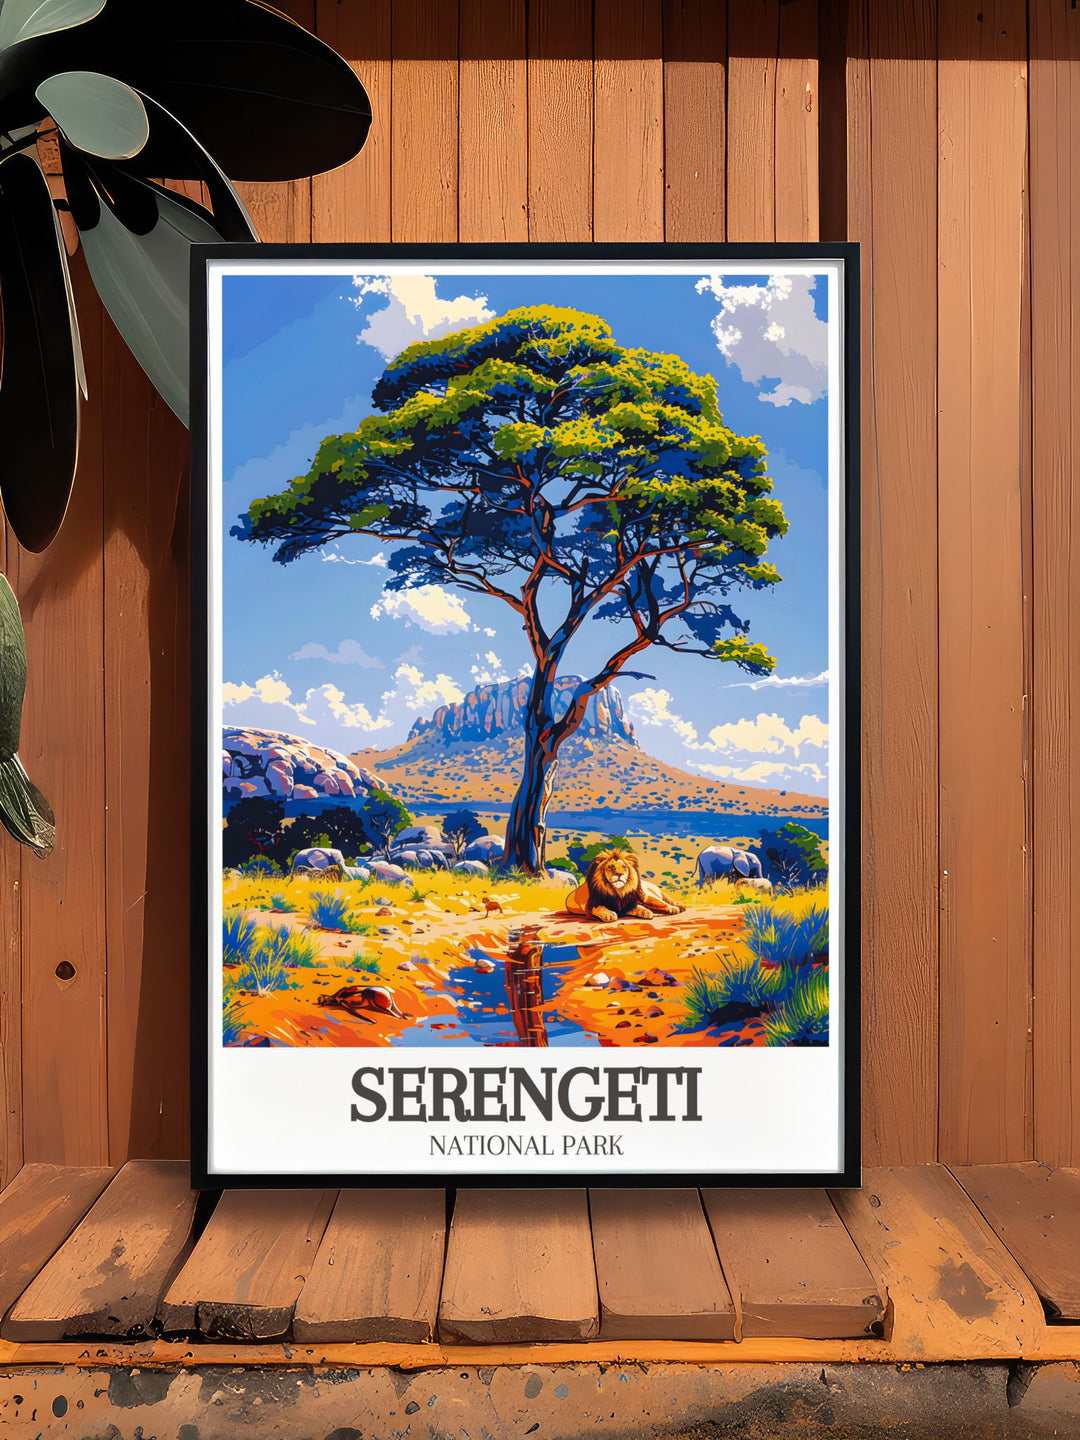 Framed print featuring Acacia tree Wildlife savanna in the Serengeti National Park perfect for elevating your home or office decor